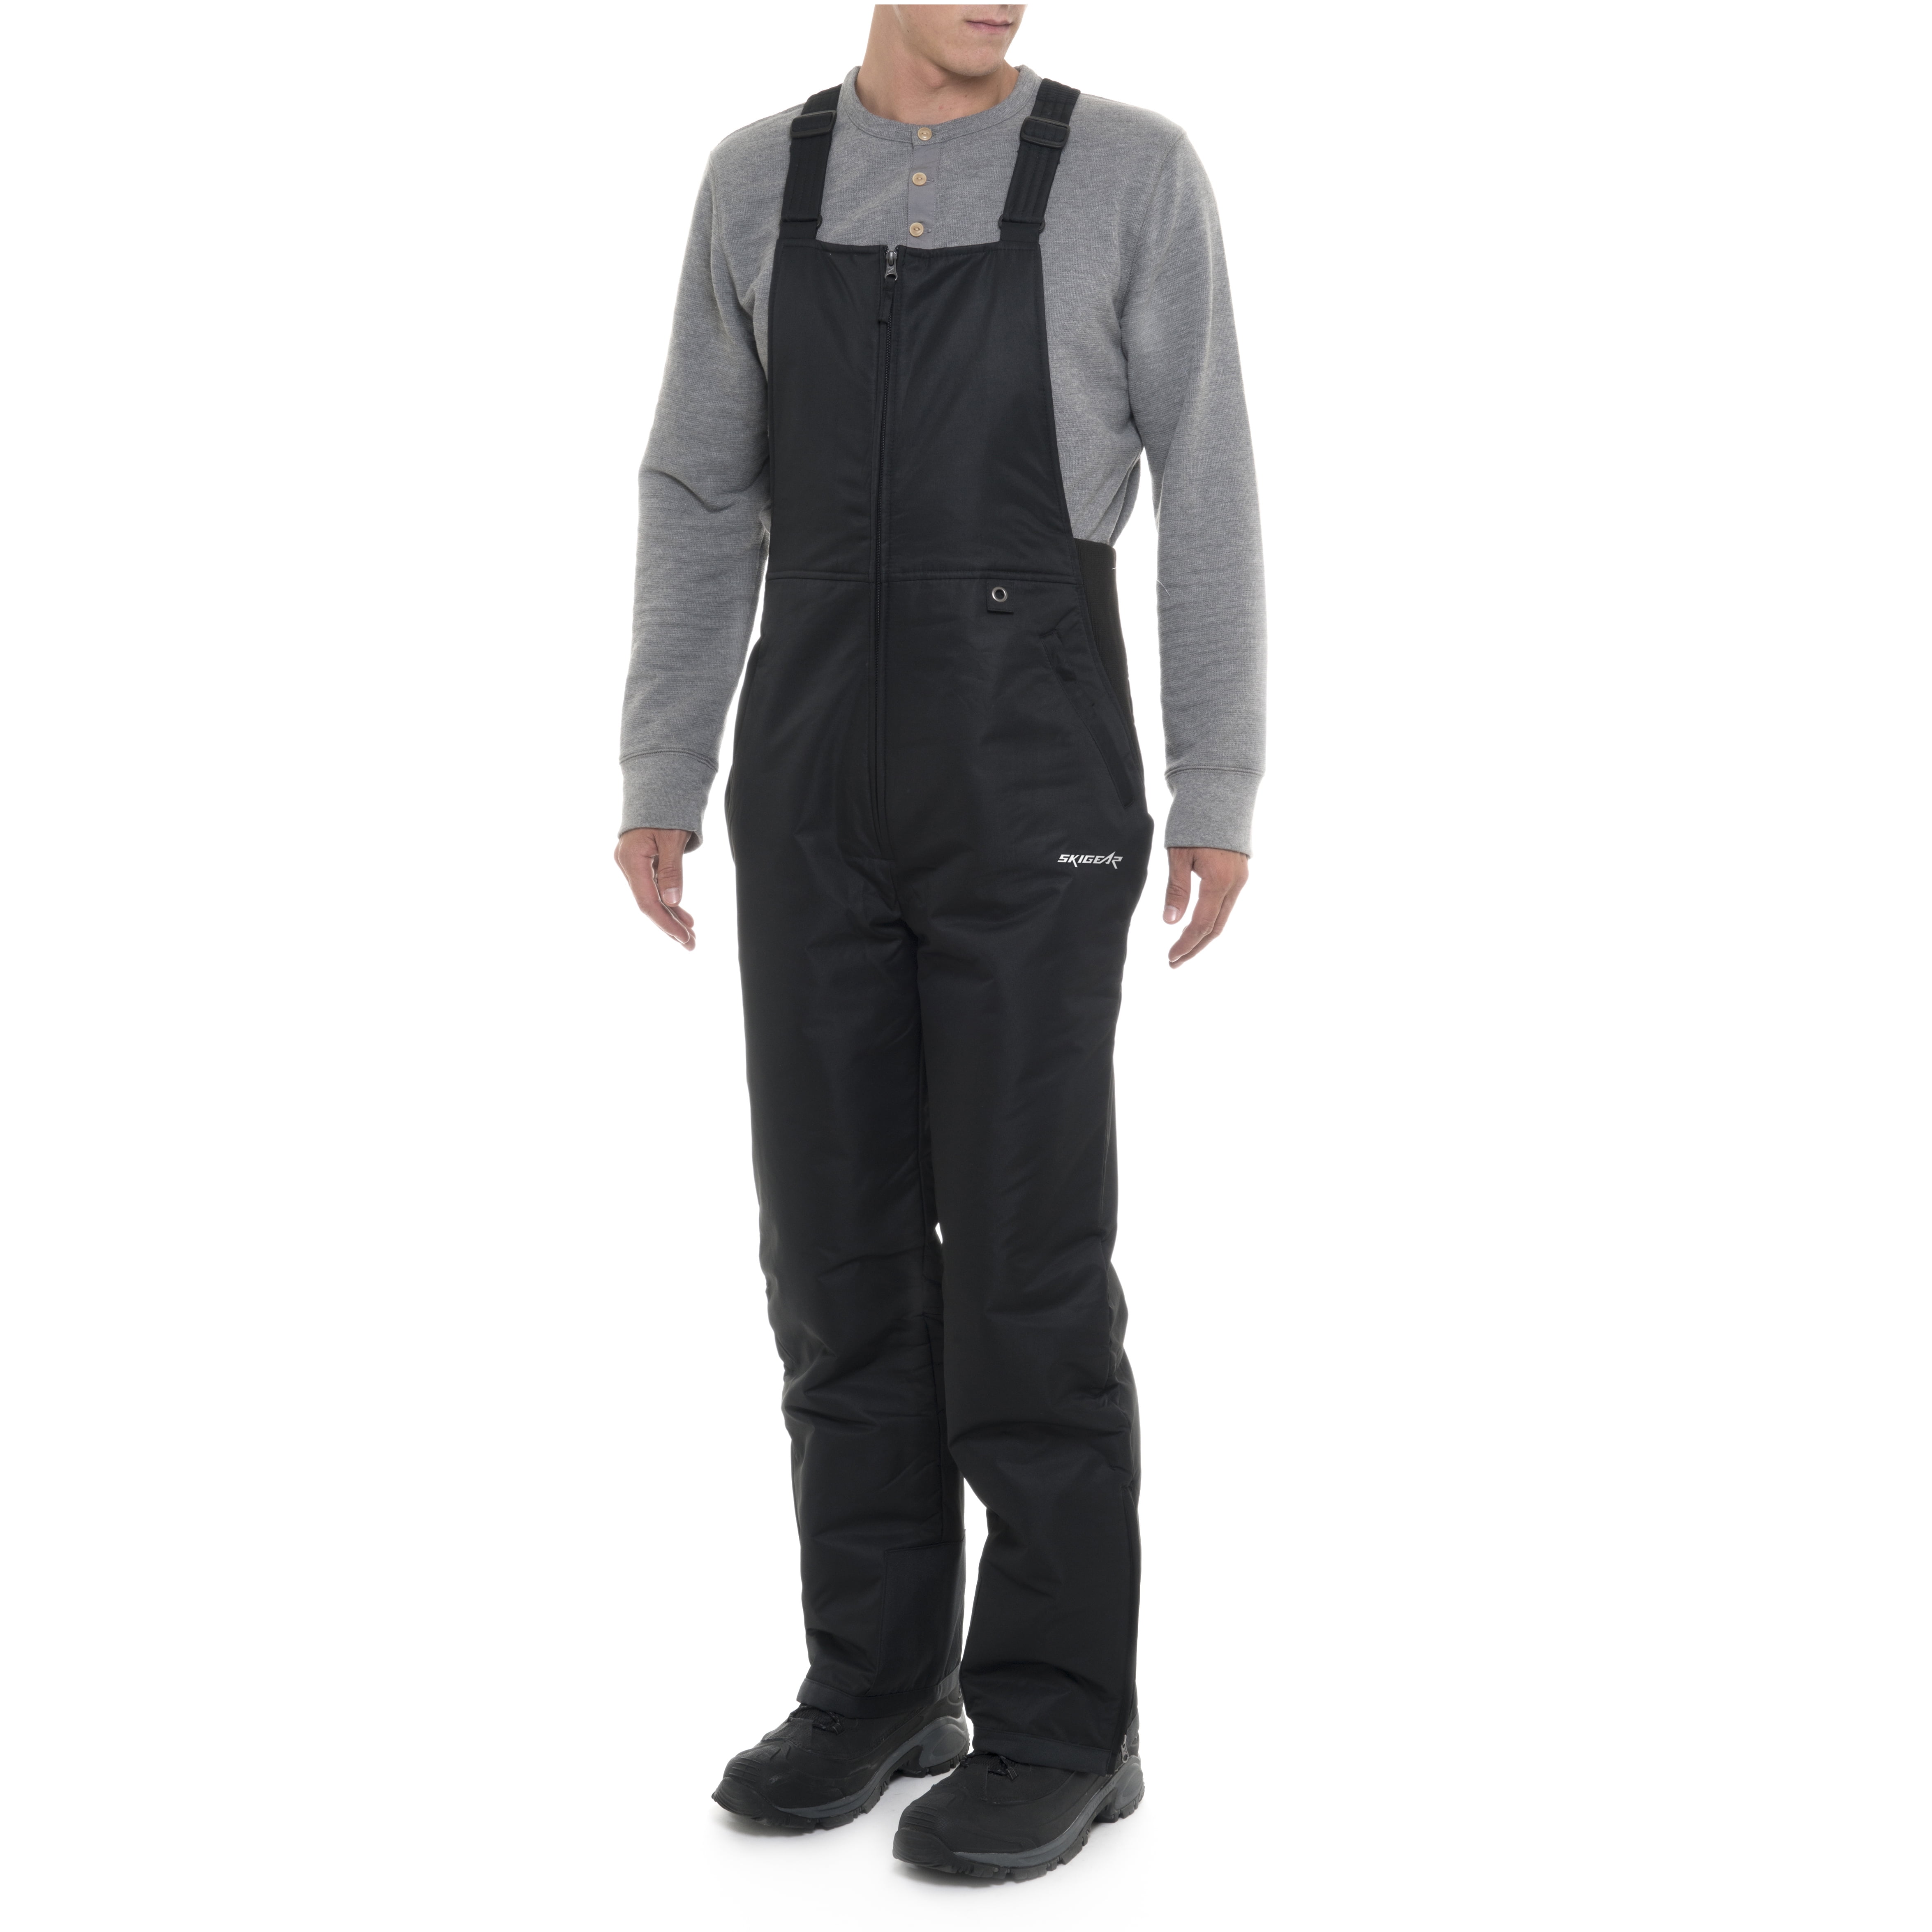 SkiGear by Arctix Men's Essential Insulated Bib Overall 